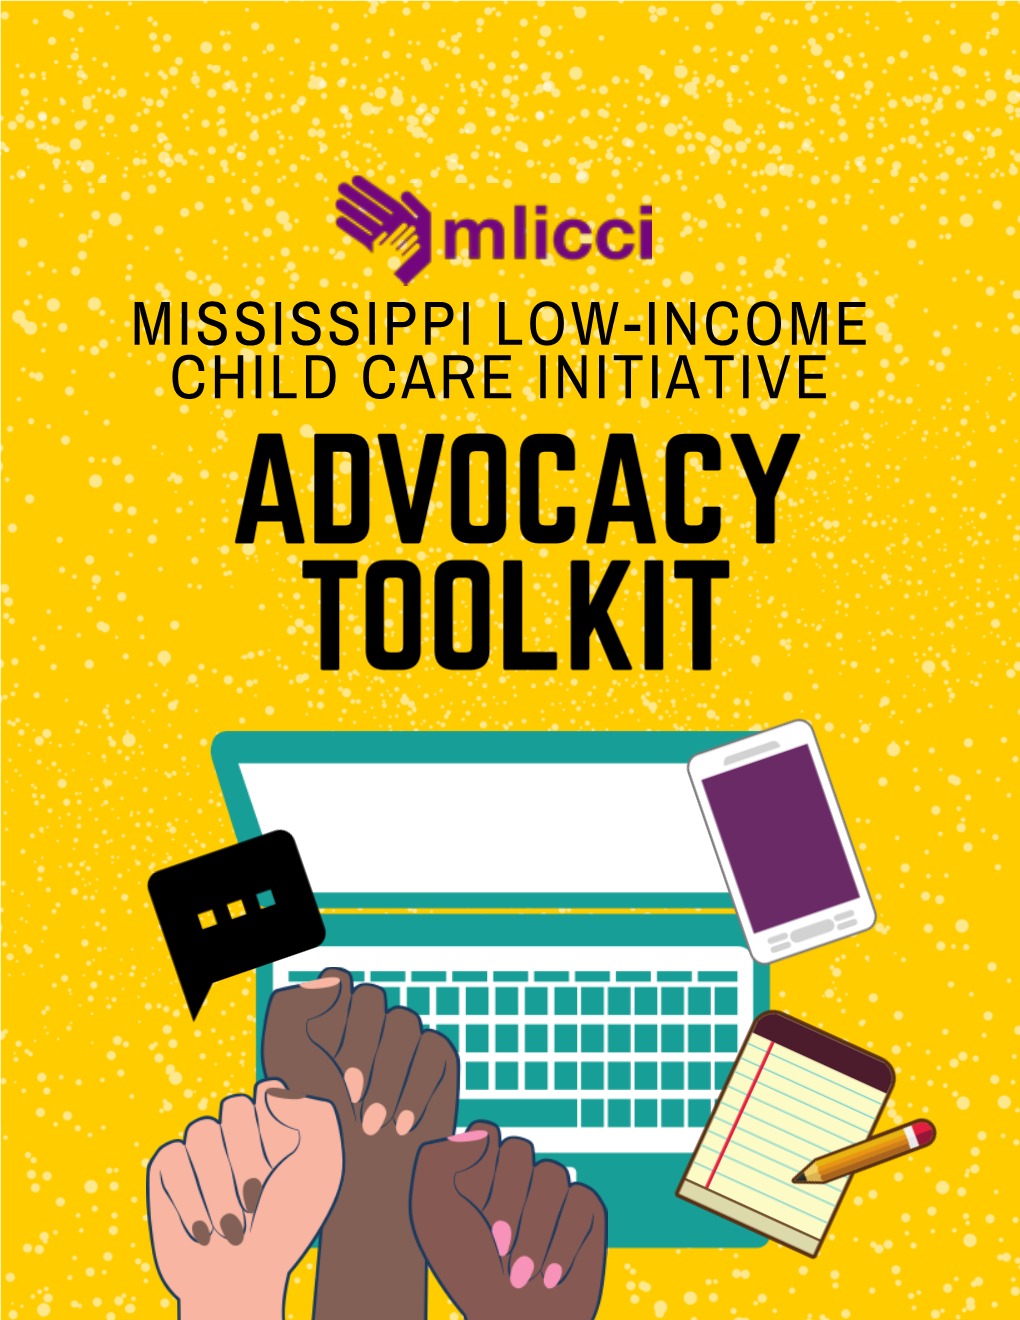 MLICCI Advocacy Toolkit